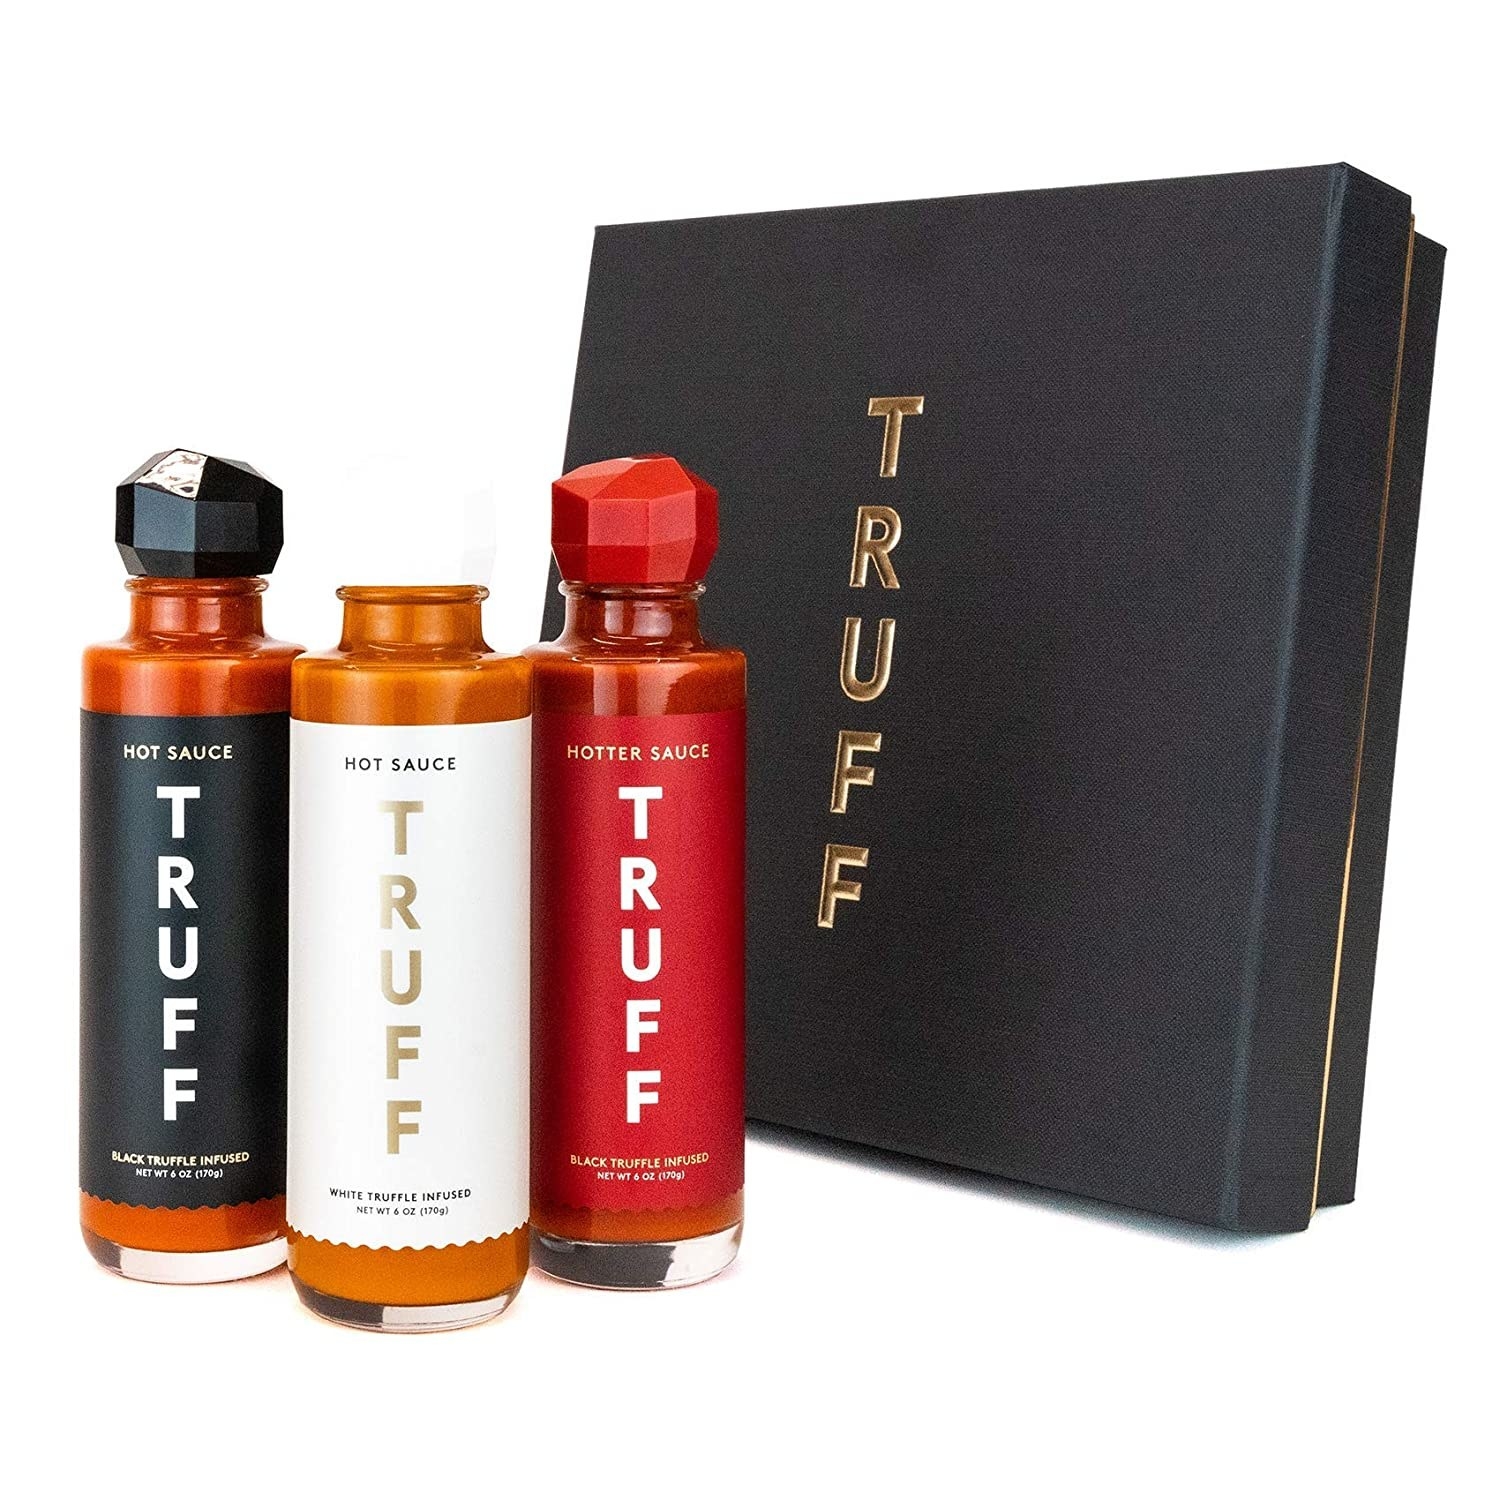 The TRUFF Hot Sauce Variety Pack